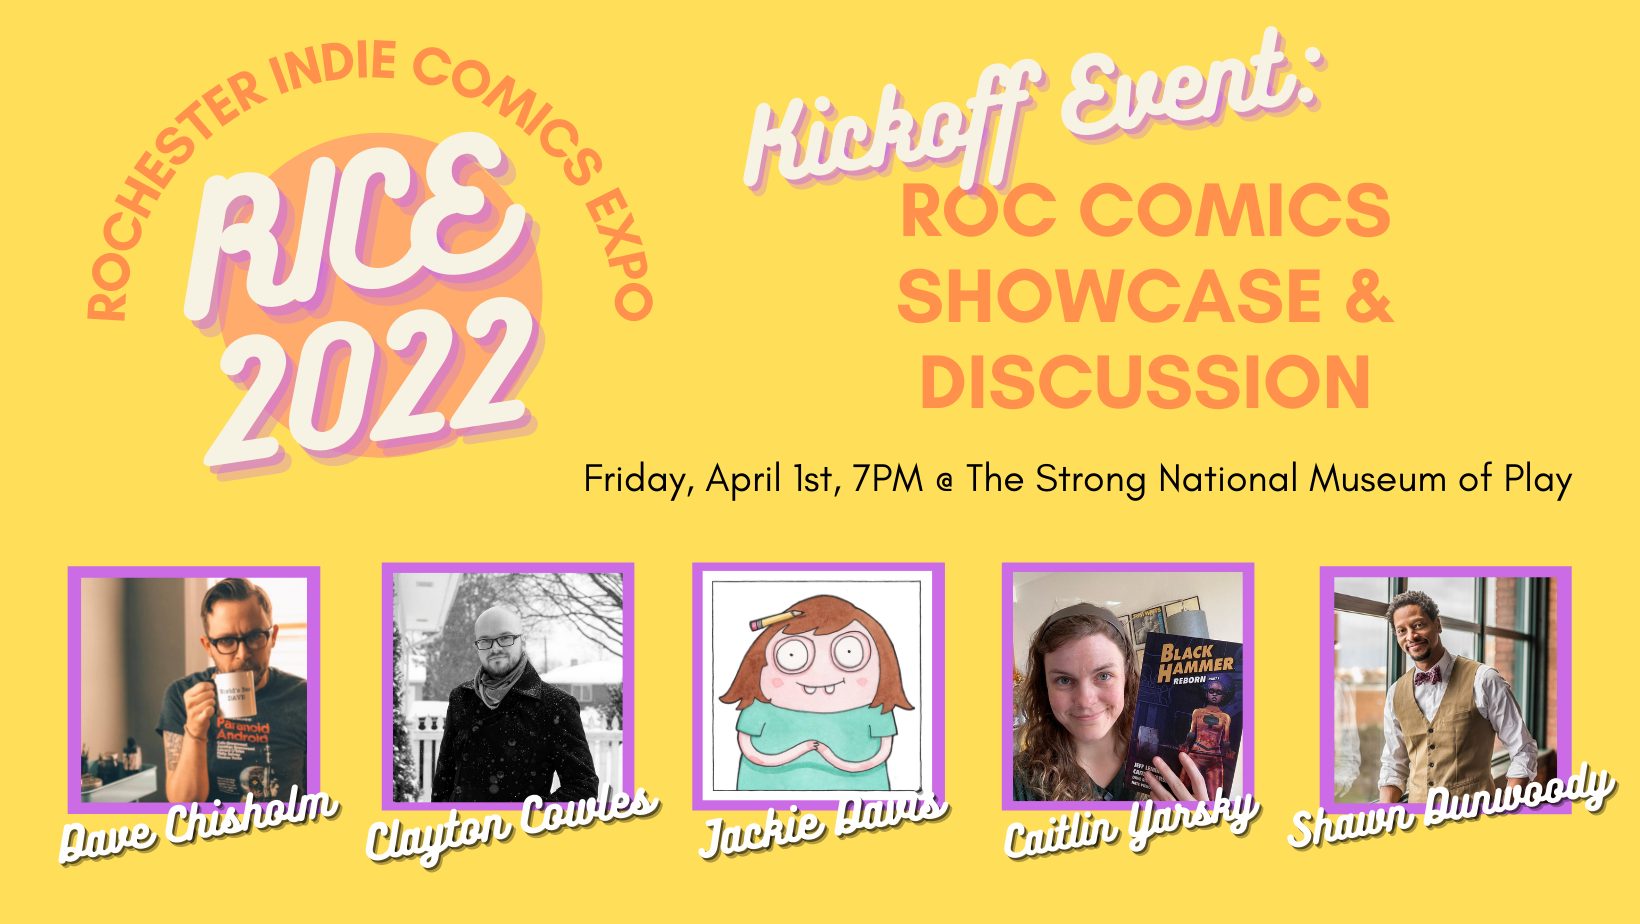 A graphic with headshots of panelists for the ROC Comics Showcase & Discussion event.